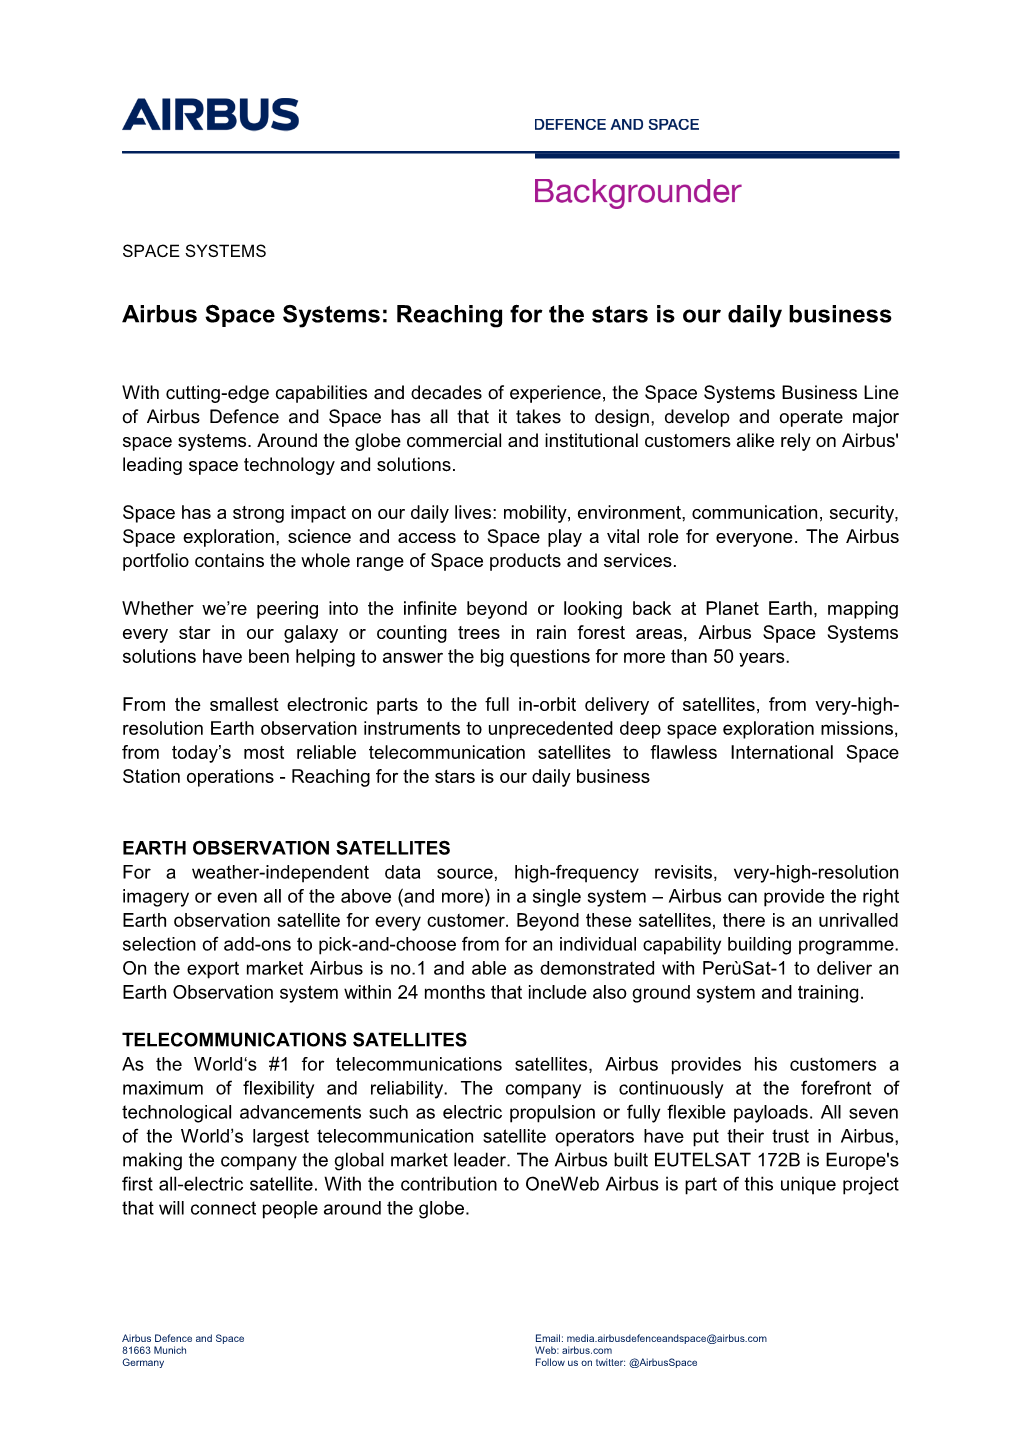 Airbus Space Systems: Reaching for the Stars Is Our Daily Business